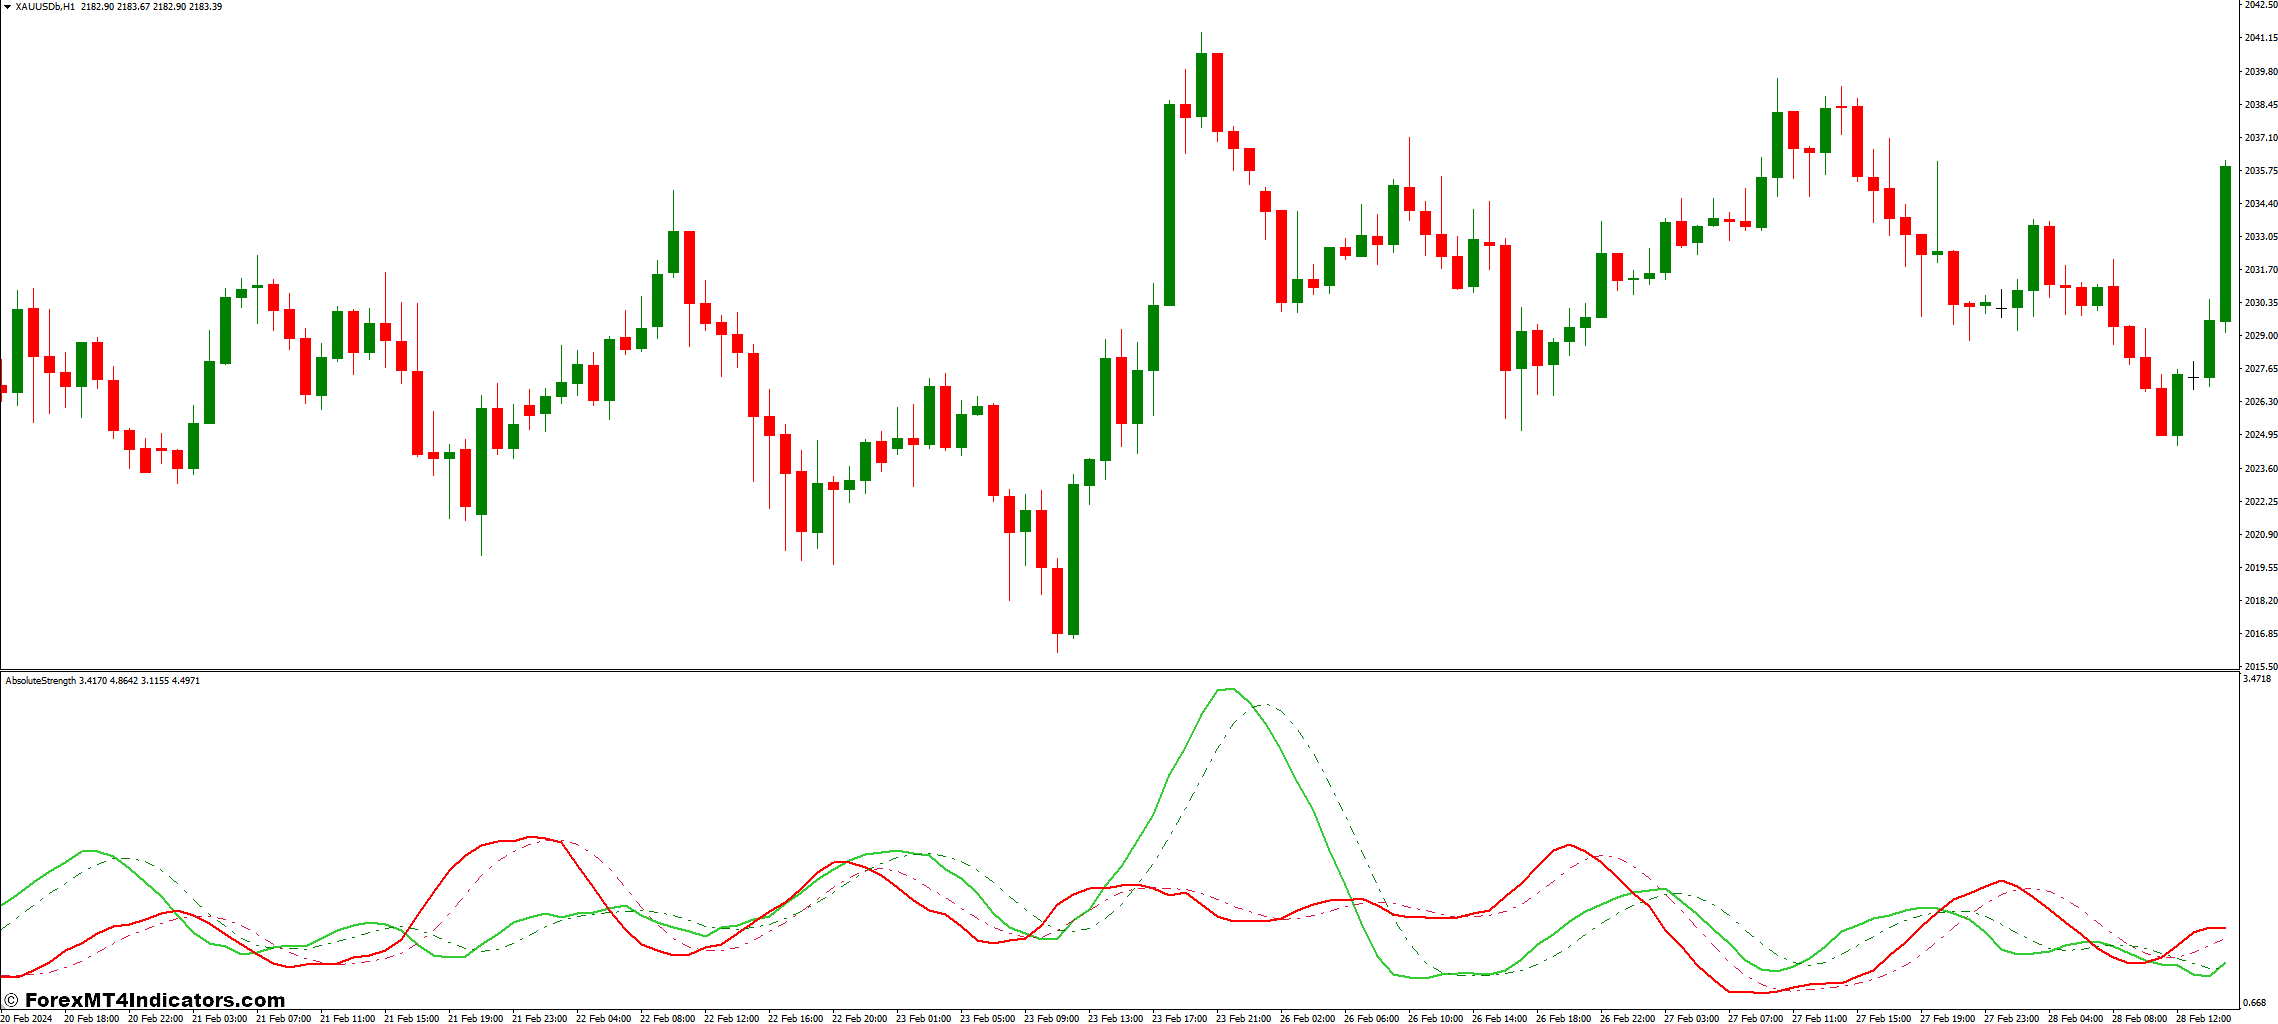 Interpreting the Absolute Strength Indicator's Signals